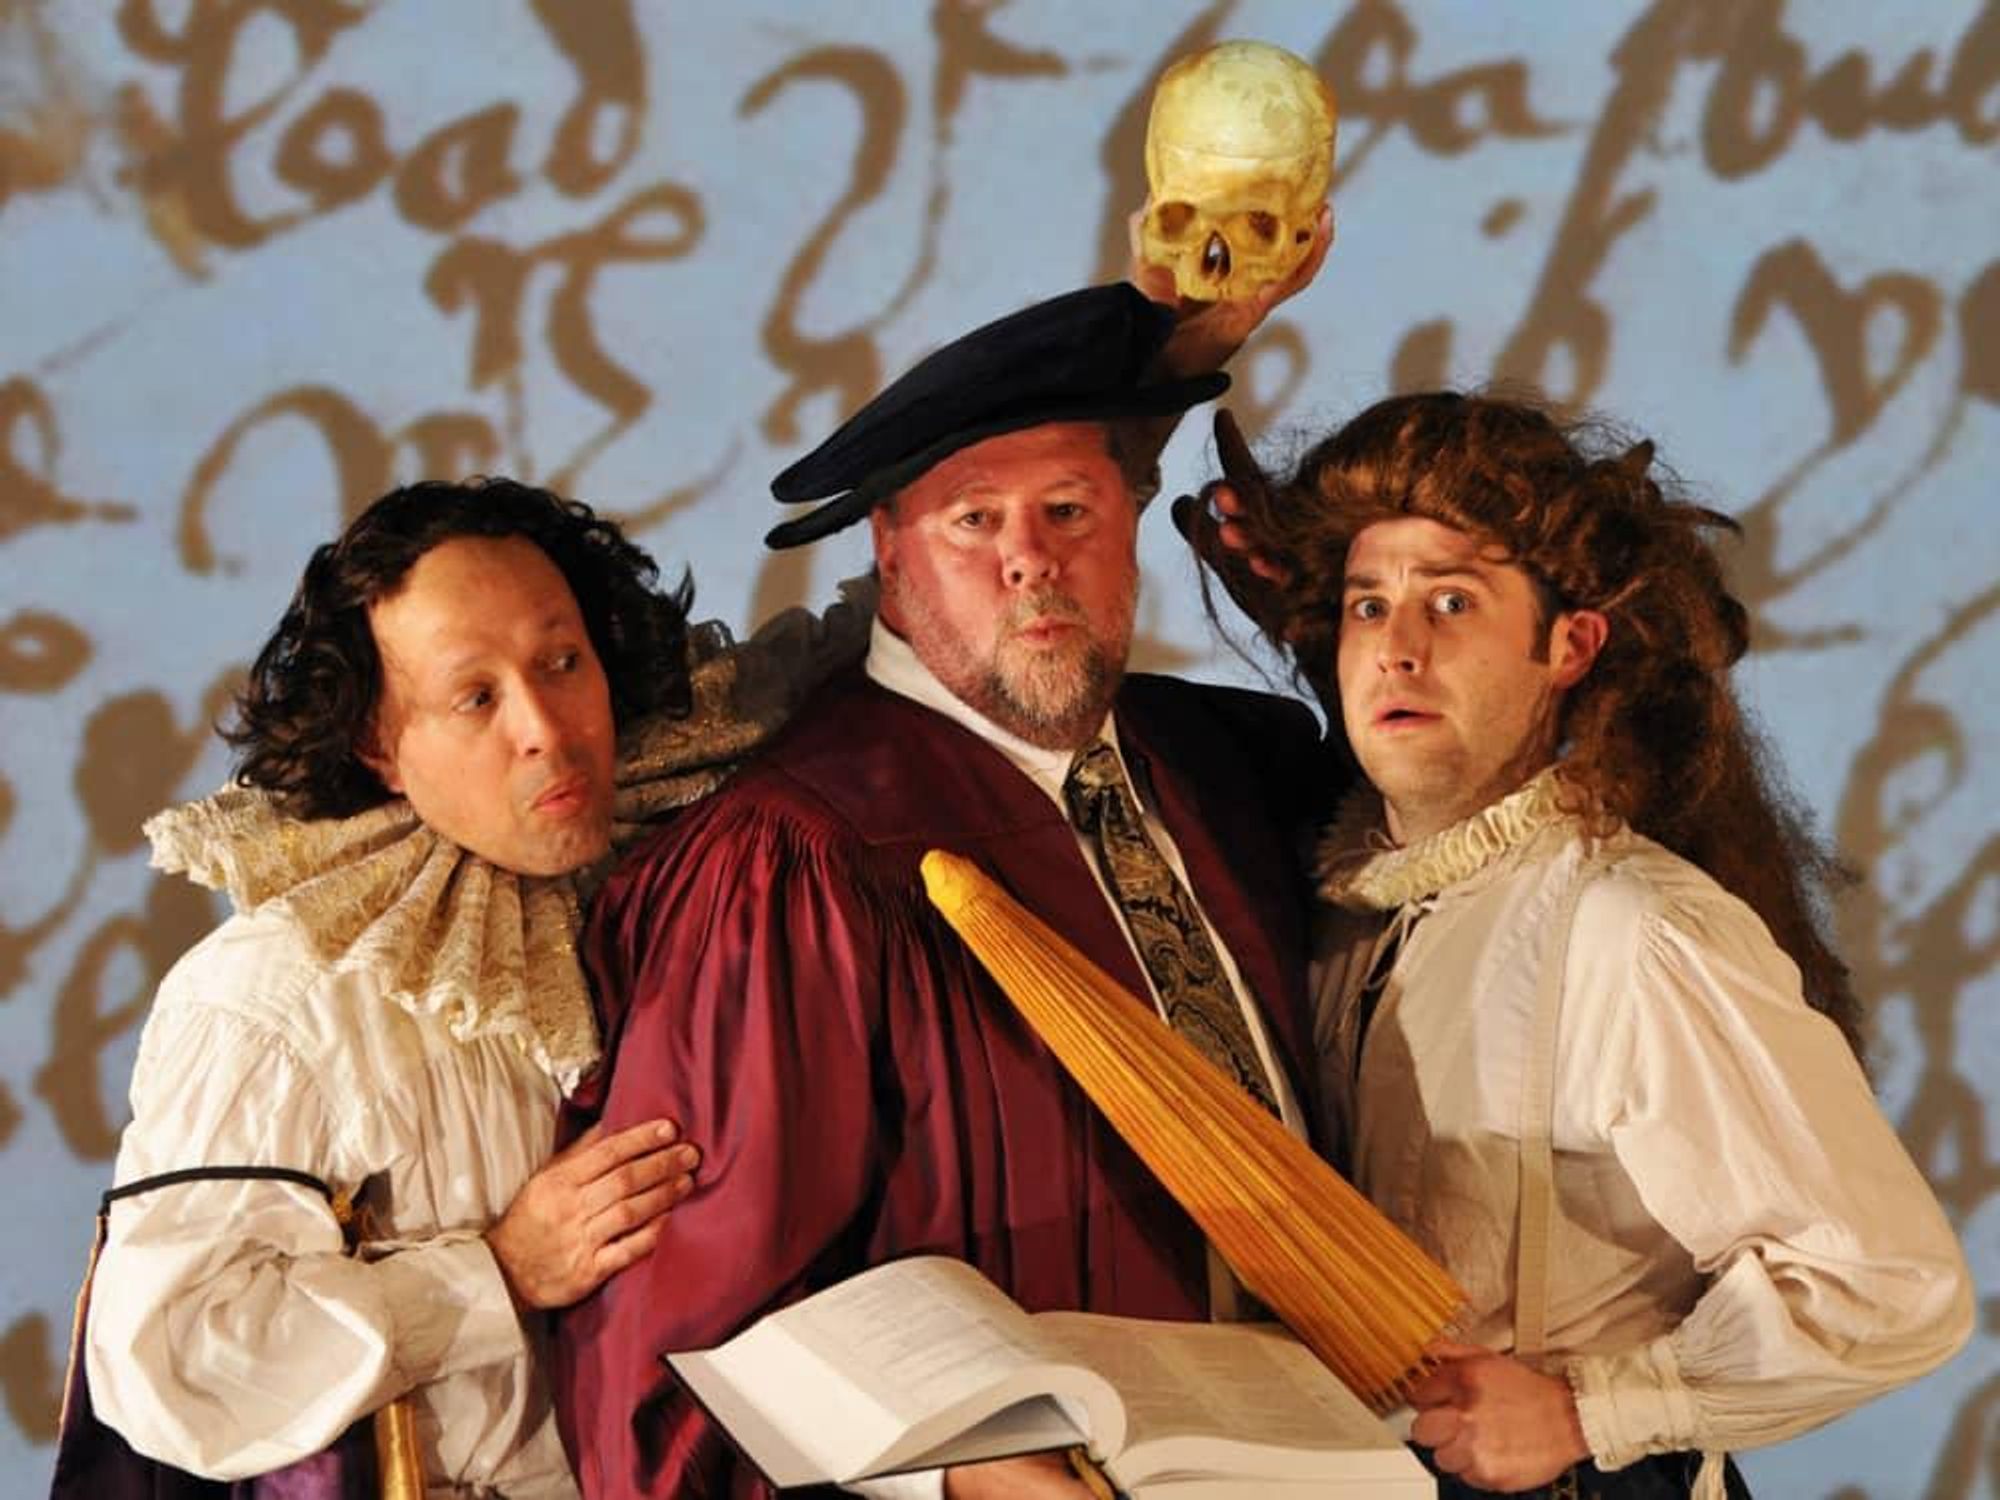 Shakespeare Dallas presents The Complete Works of Shakespeare Abridged